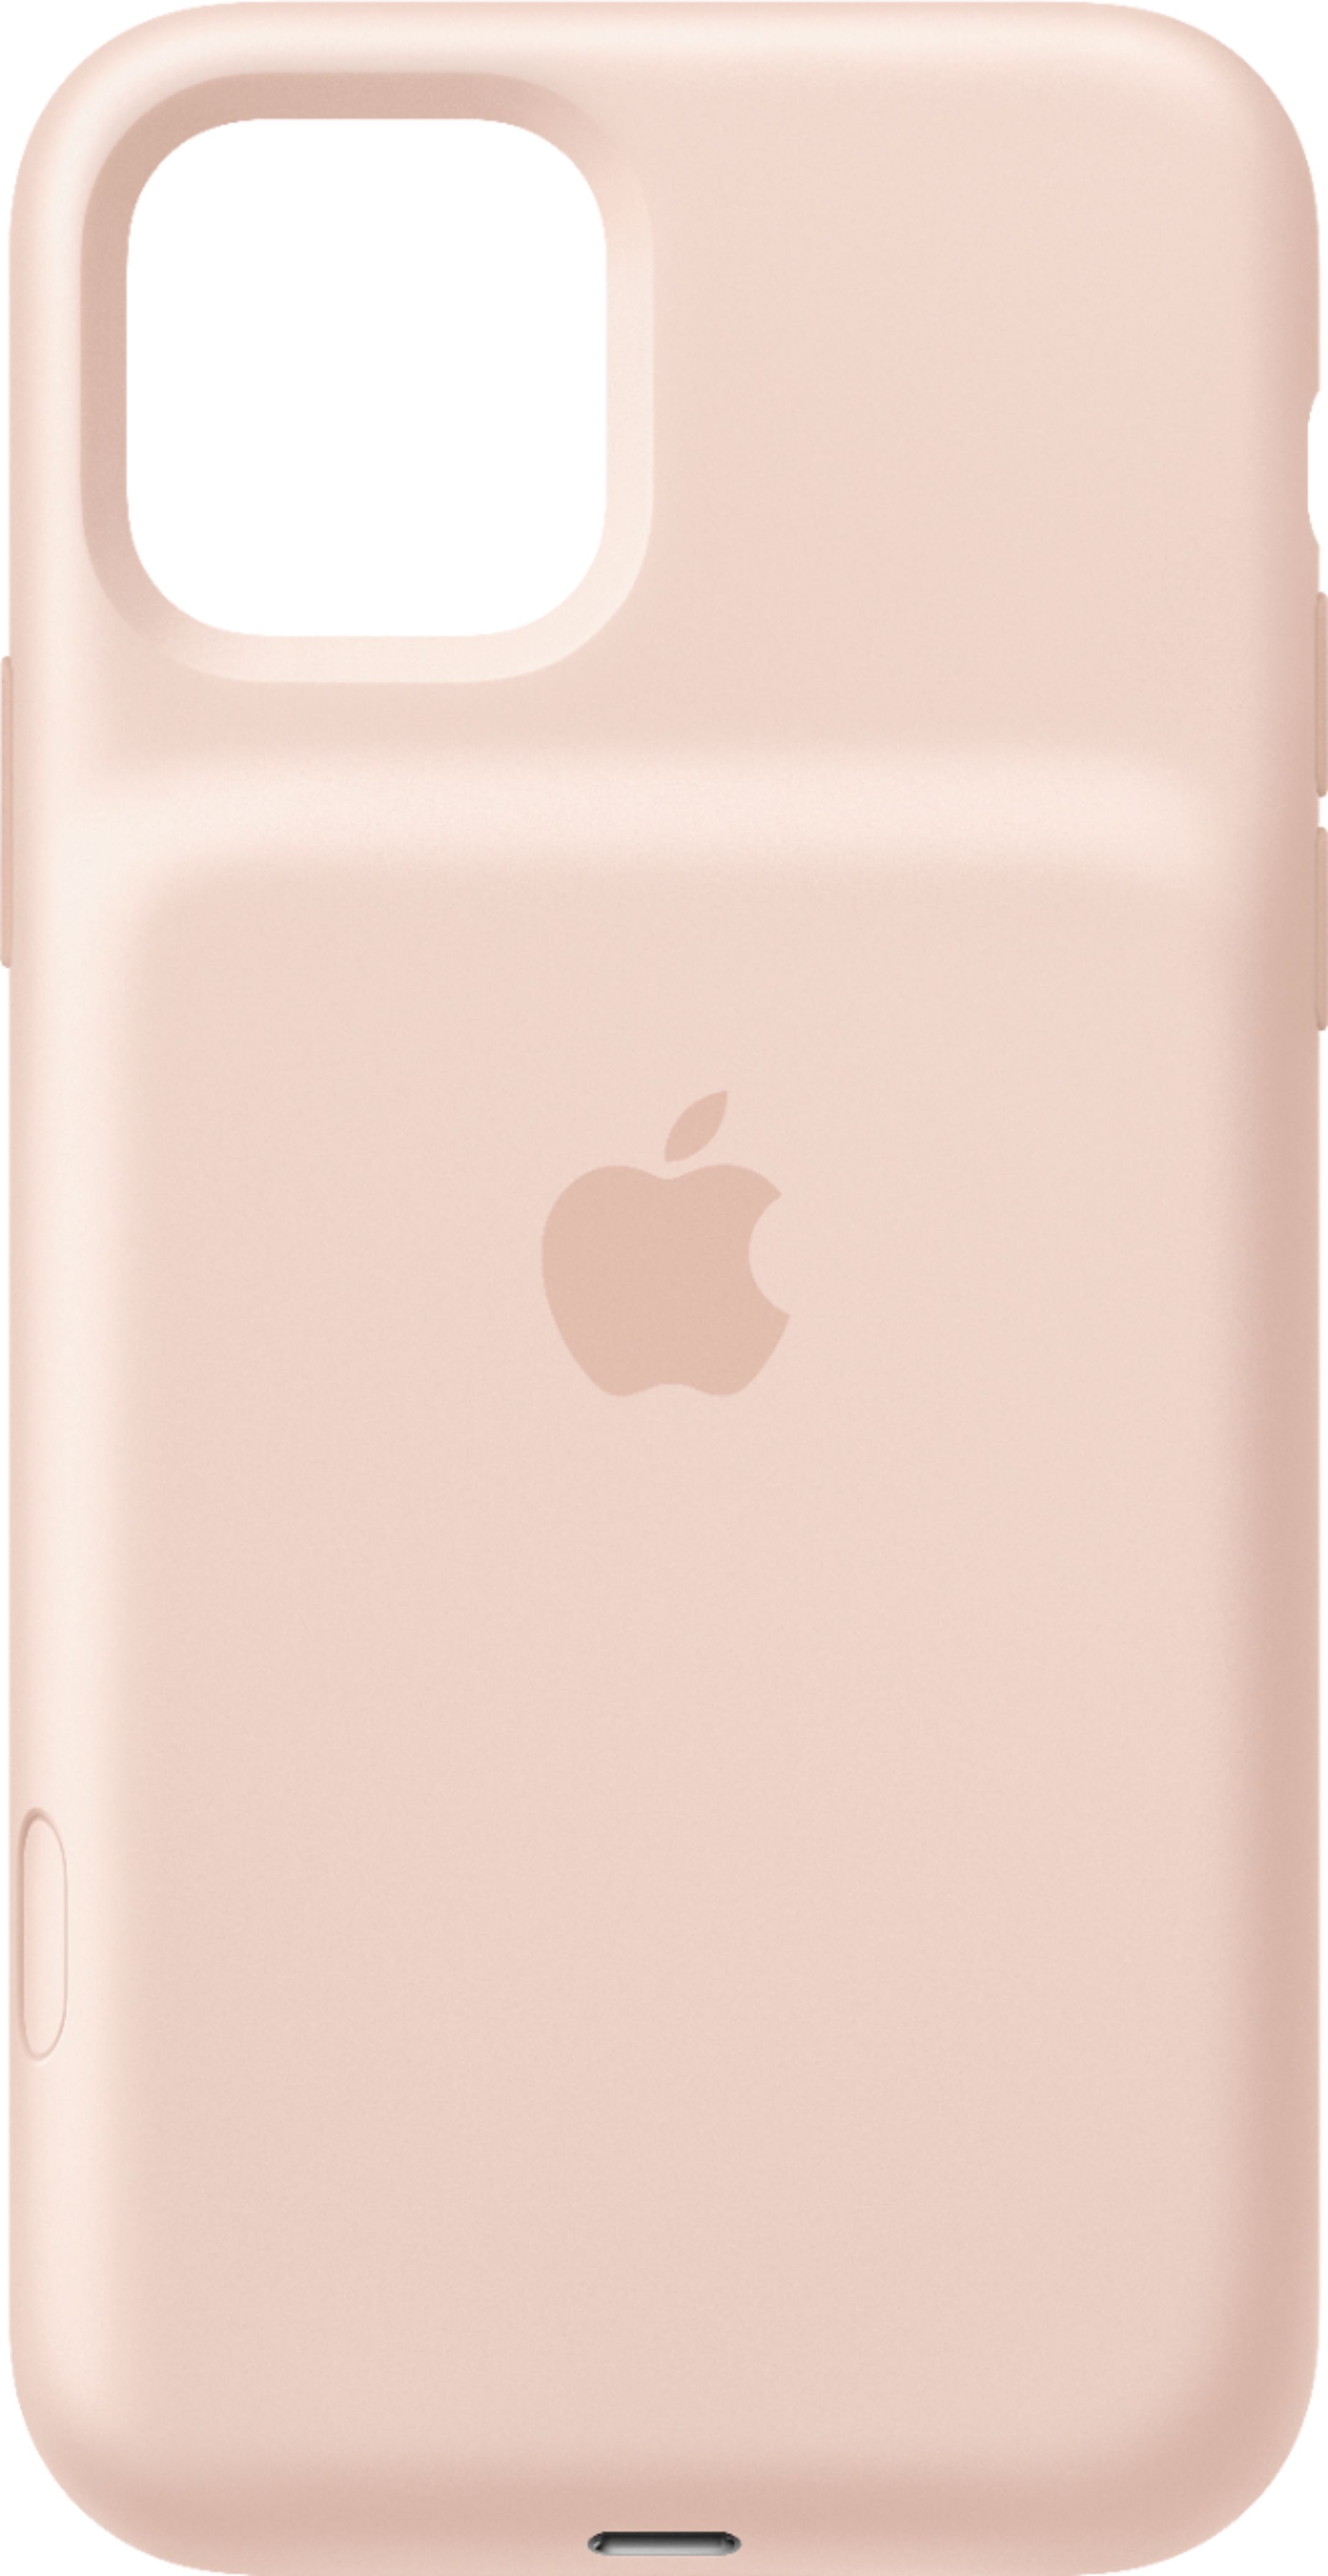 Best Buy: Apple iPhone 11 Pro Smart Battery Case Pink Sand MWVN2LL/A